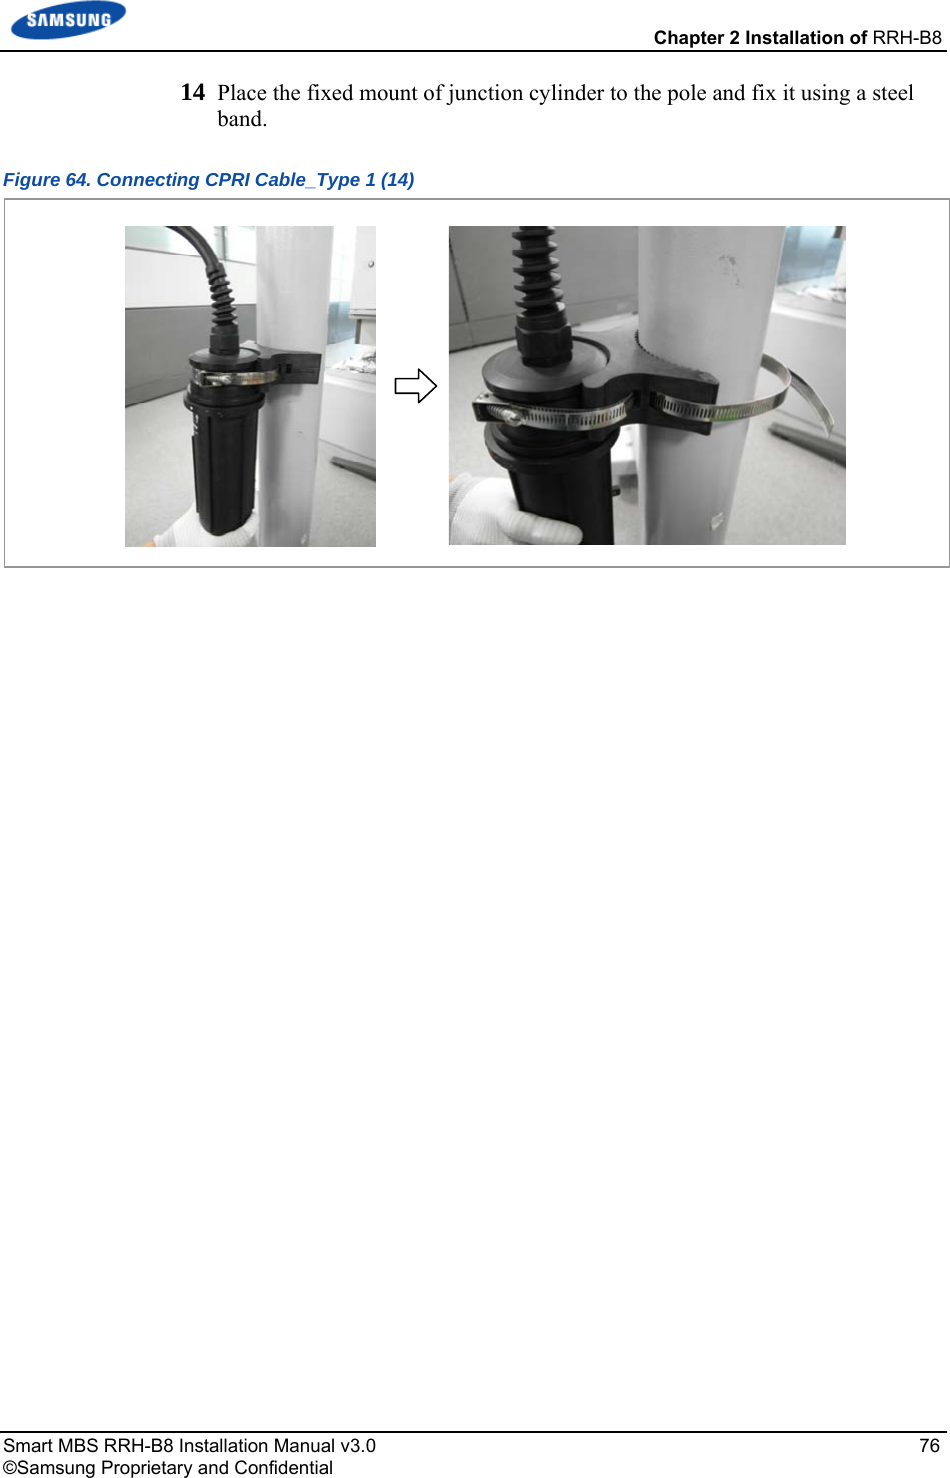  Chapter 2 Installation of RRH-B8 Smart MBS RRH-B8 Installation Manual v3.0   76 ©Samsung Proprietary and Confidential 14  Place the fixed mount of junction cylinder to the pole and fix it using a steel band. Figure 64. Connecting CPRI Cable_Type 1 (14)    